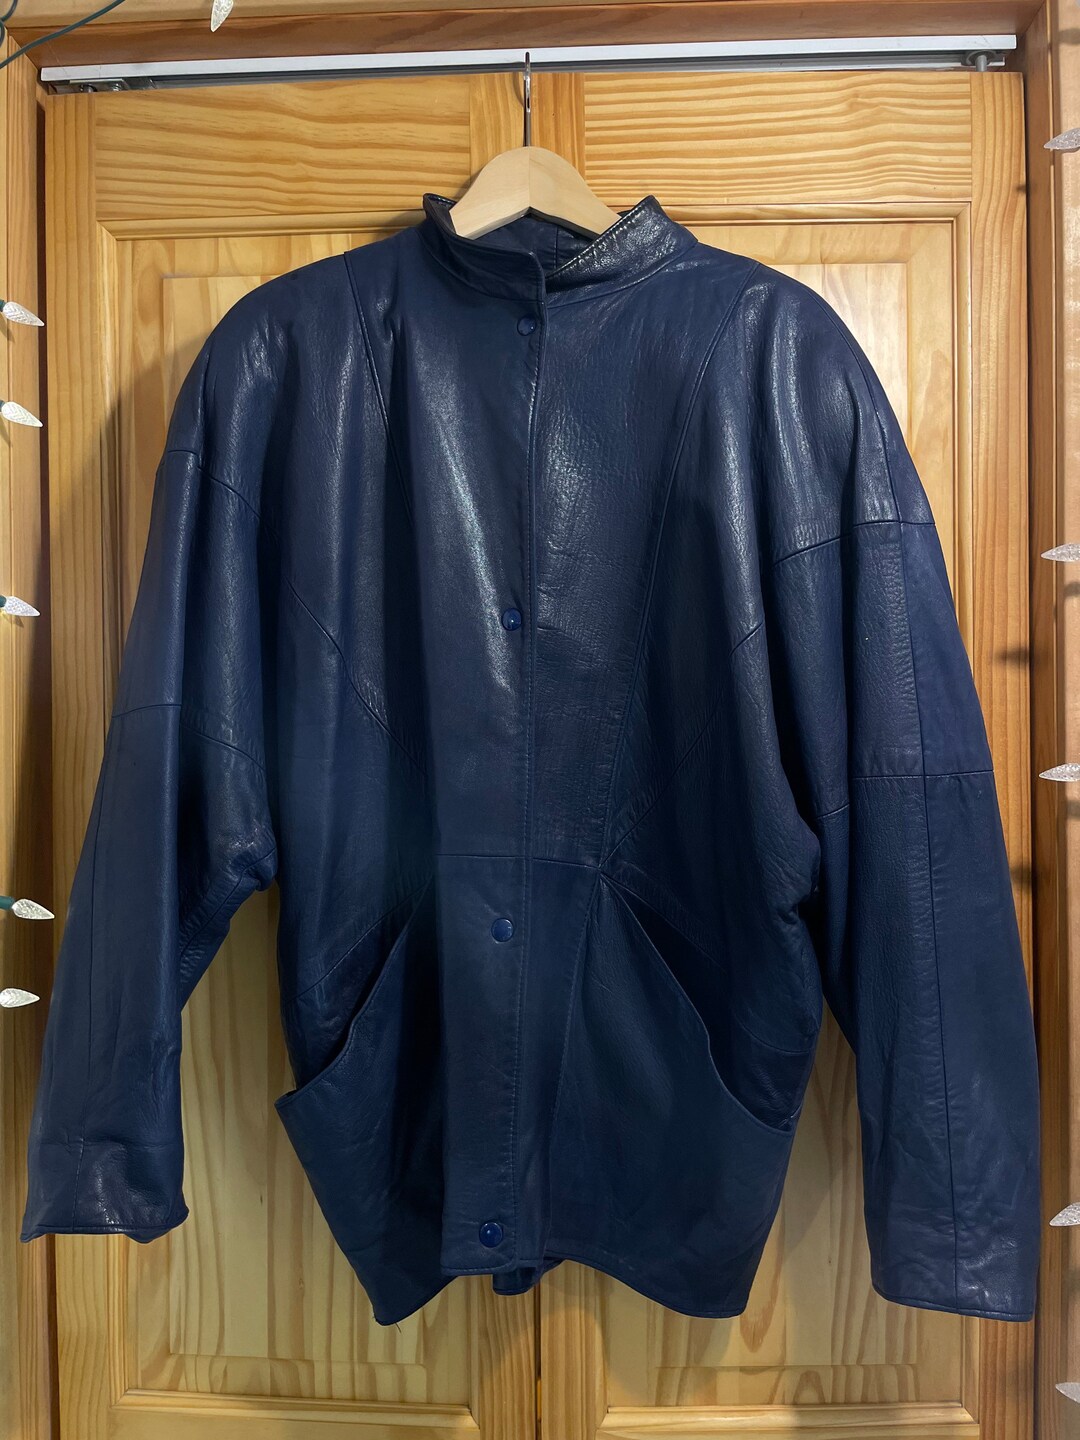 VINTAGE Dark Blue Leather Jacket With Snap Buttons - Etsy